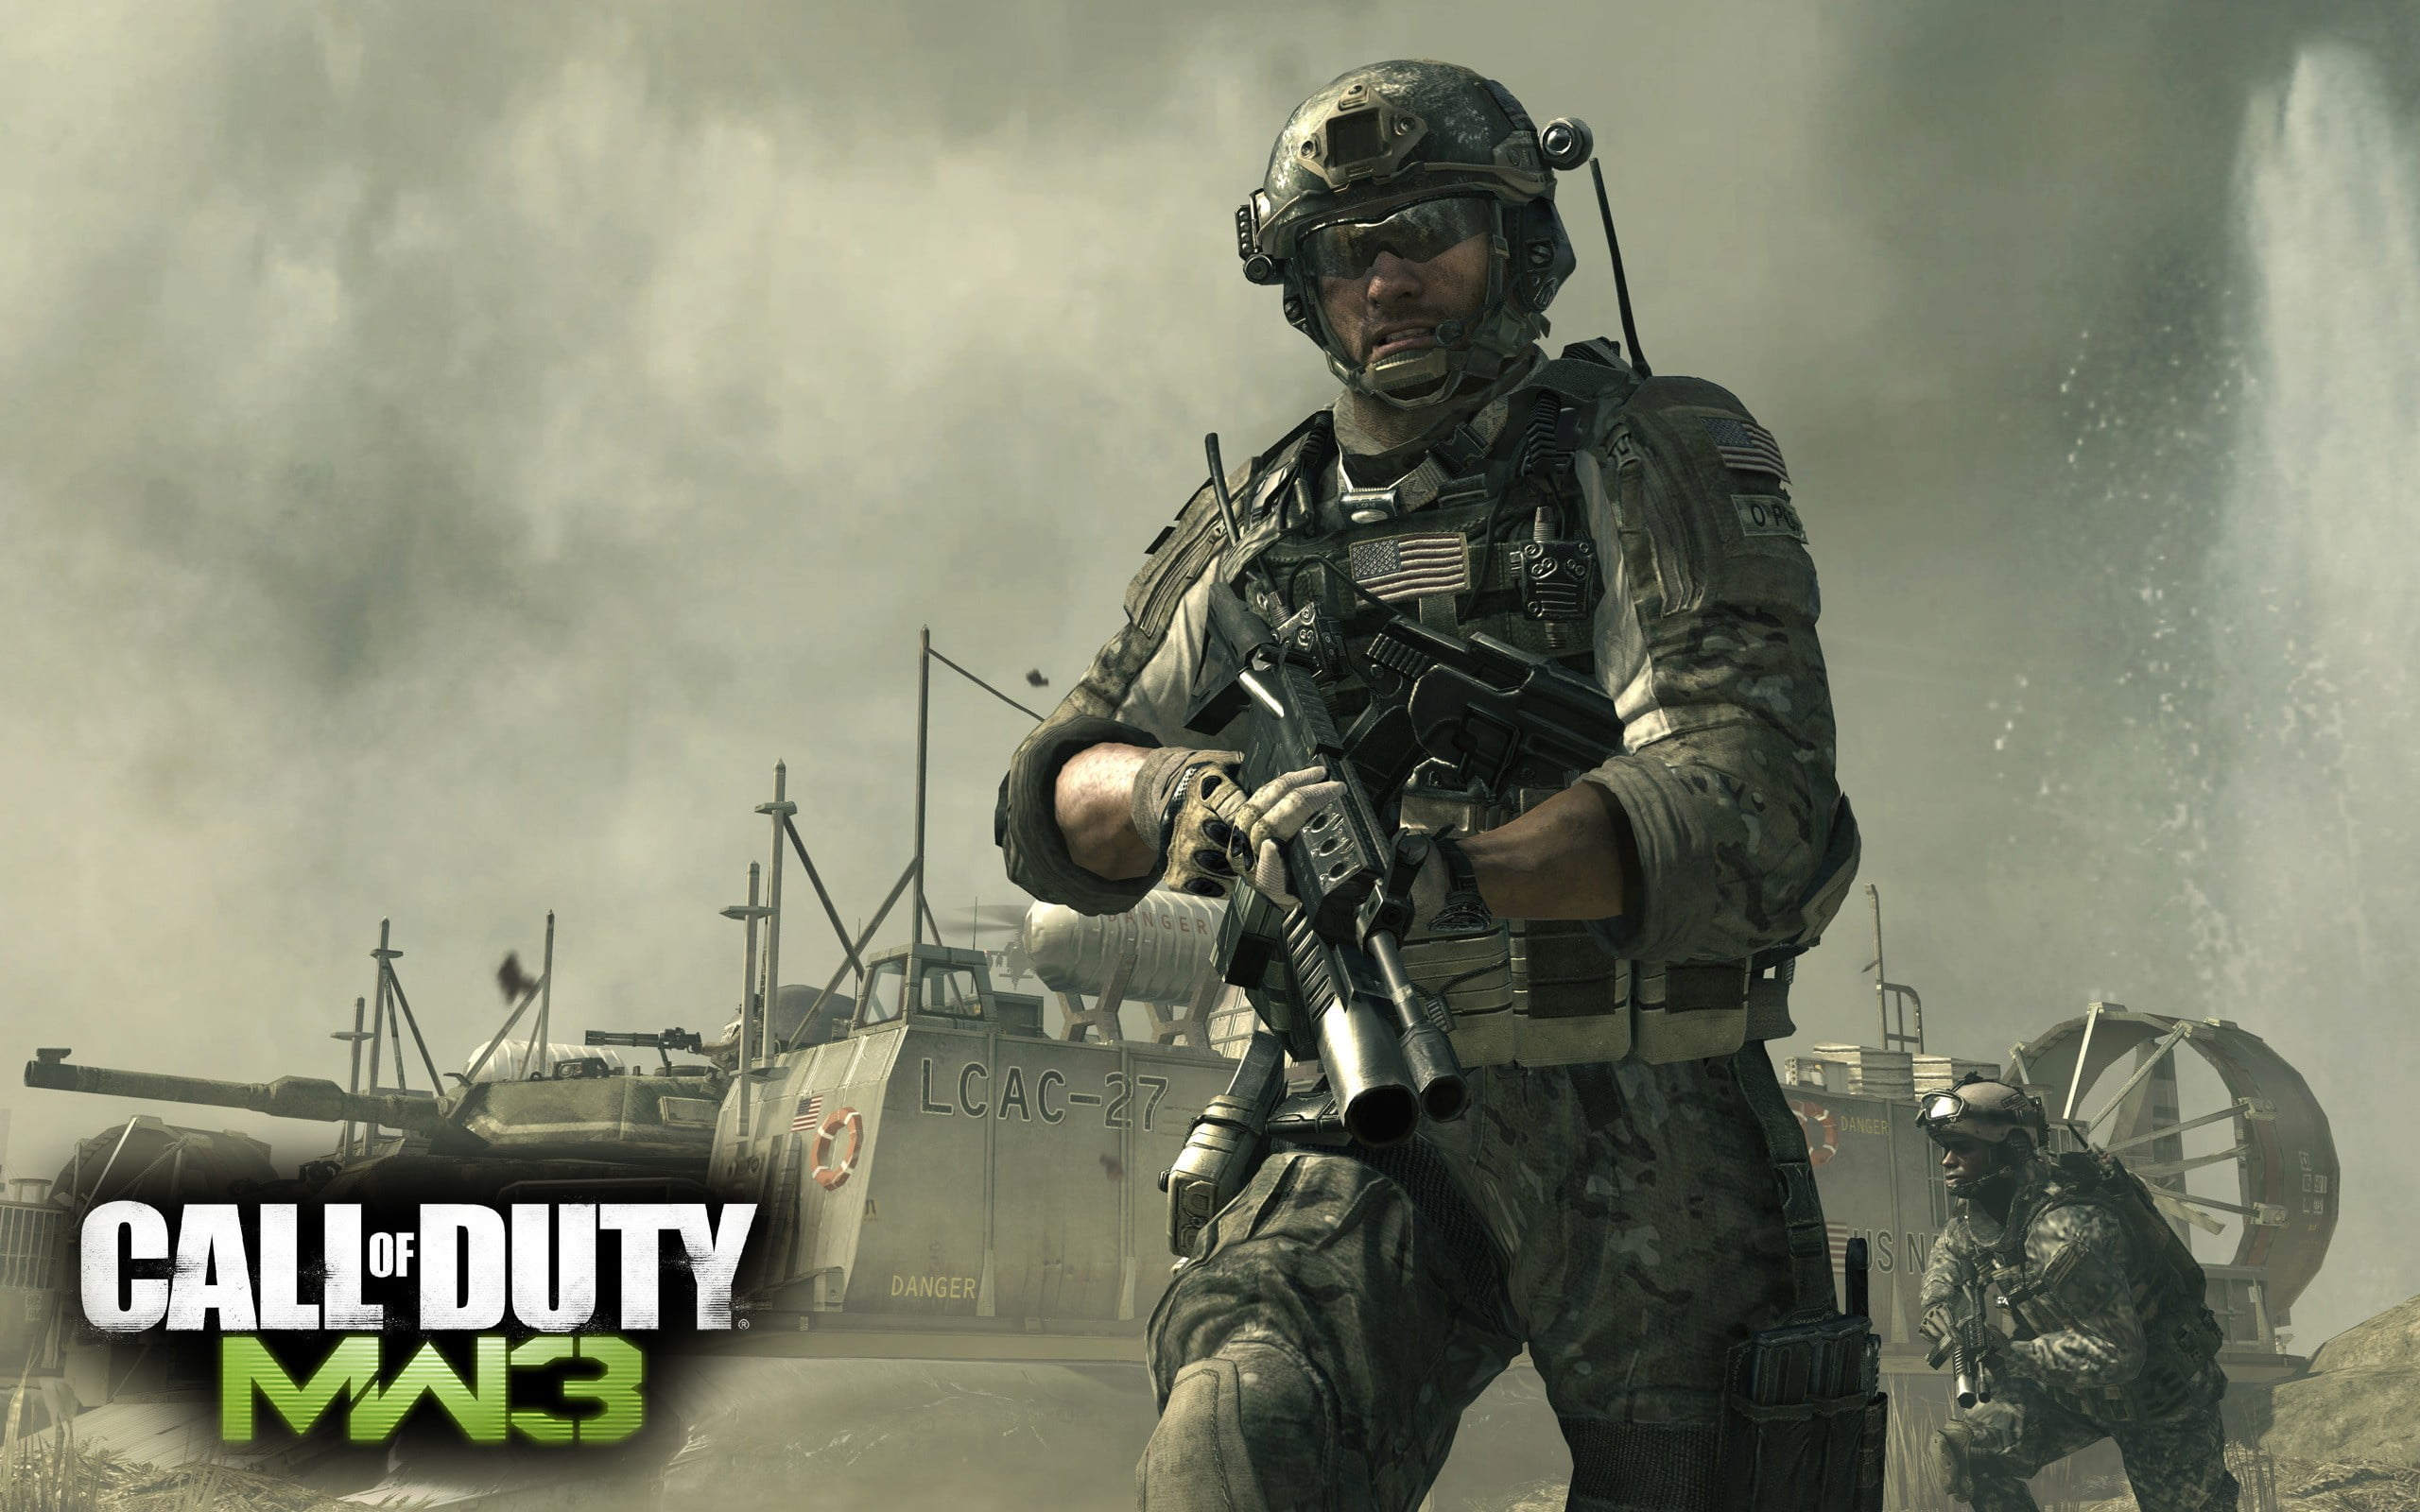 Call of Duty MW3 poster, Call of Duty Modern Warfare 3, video games